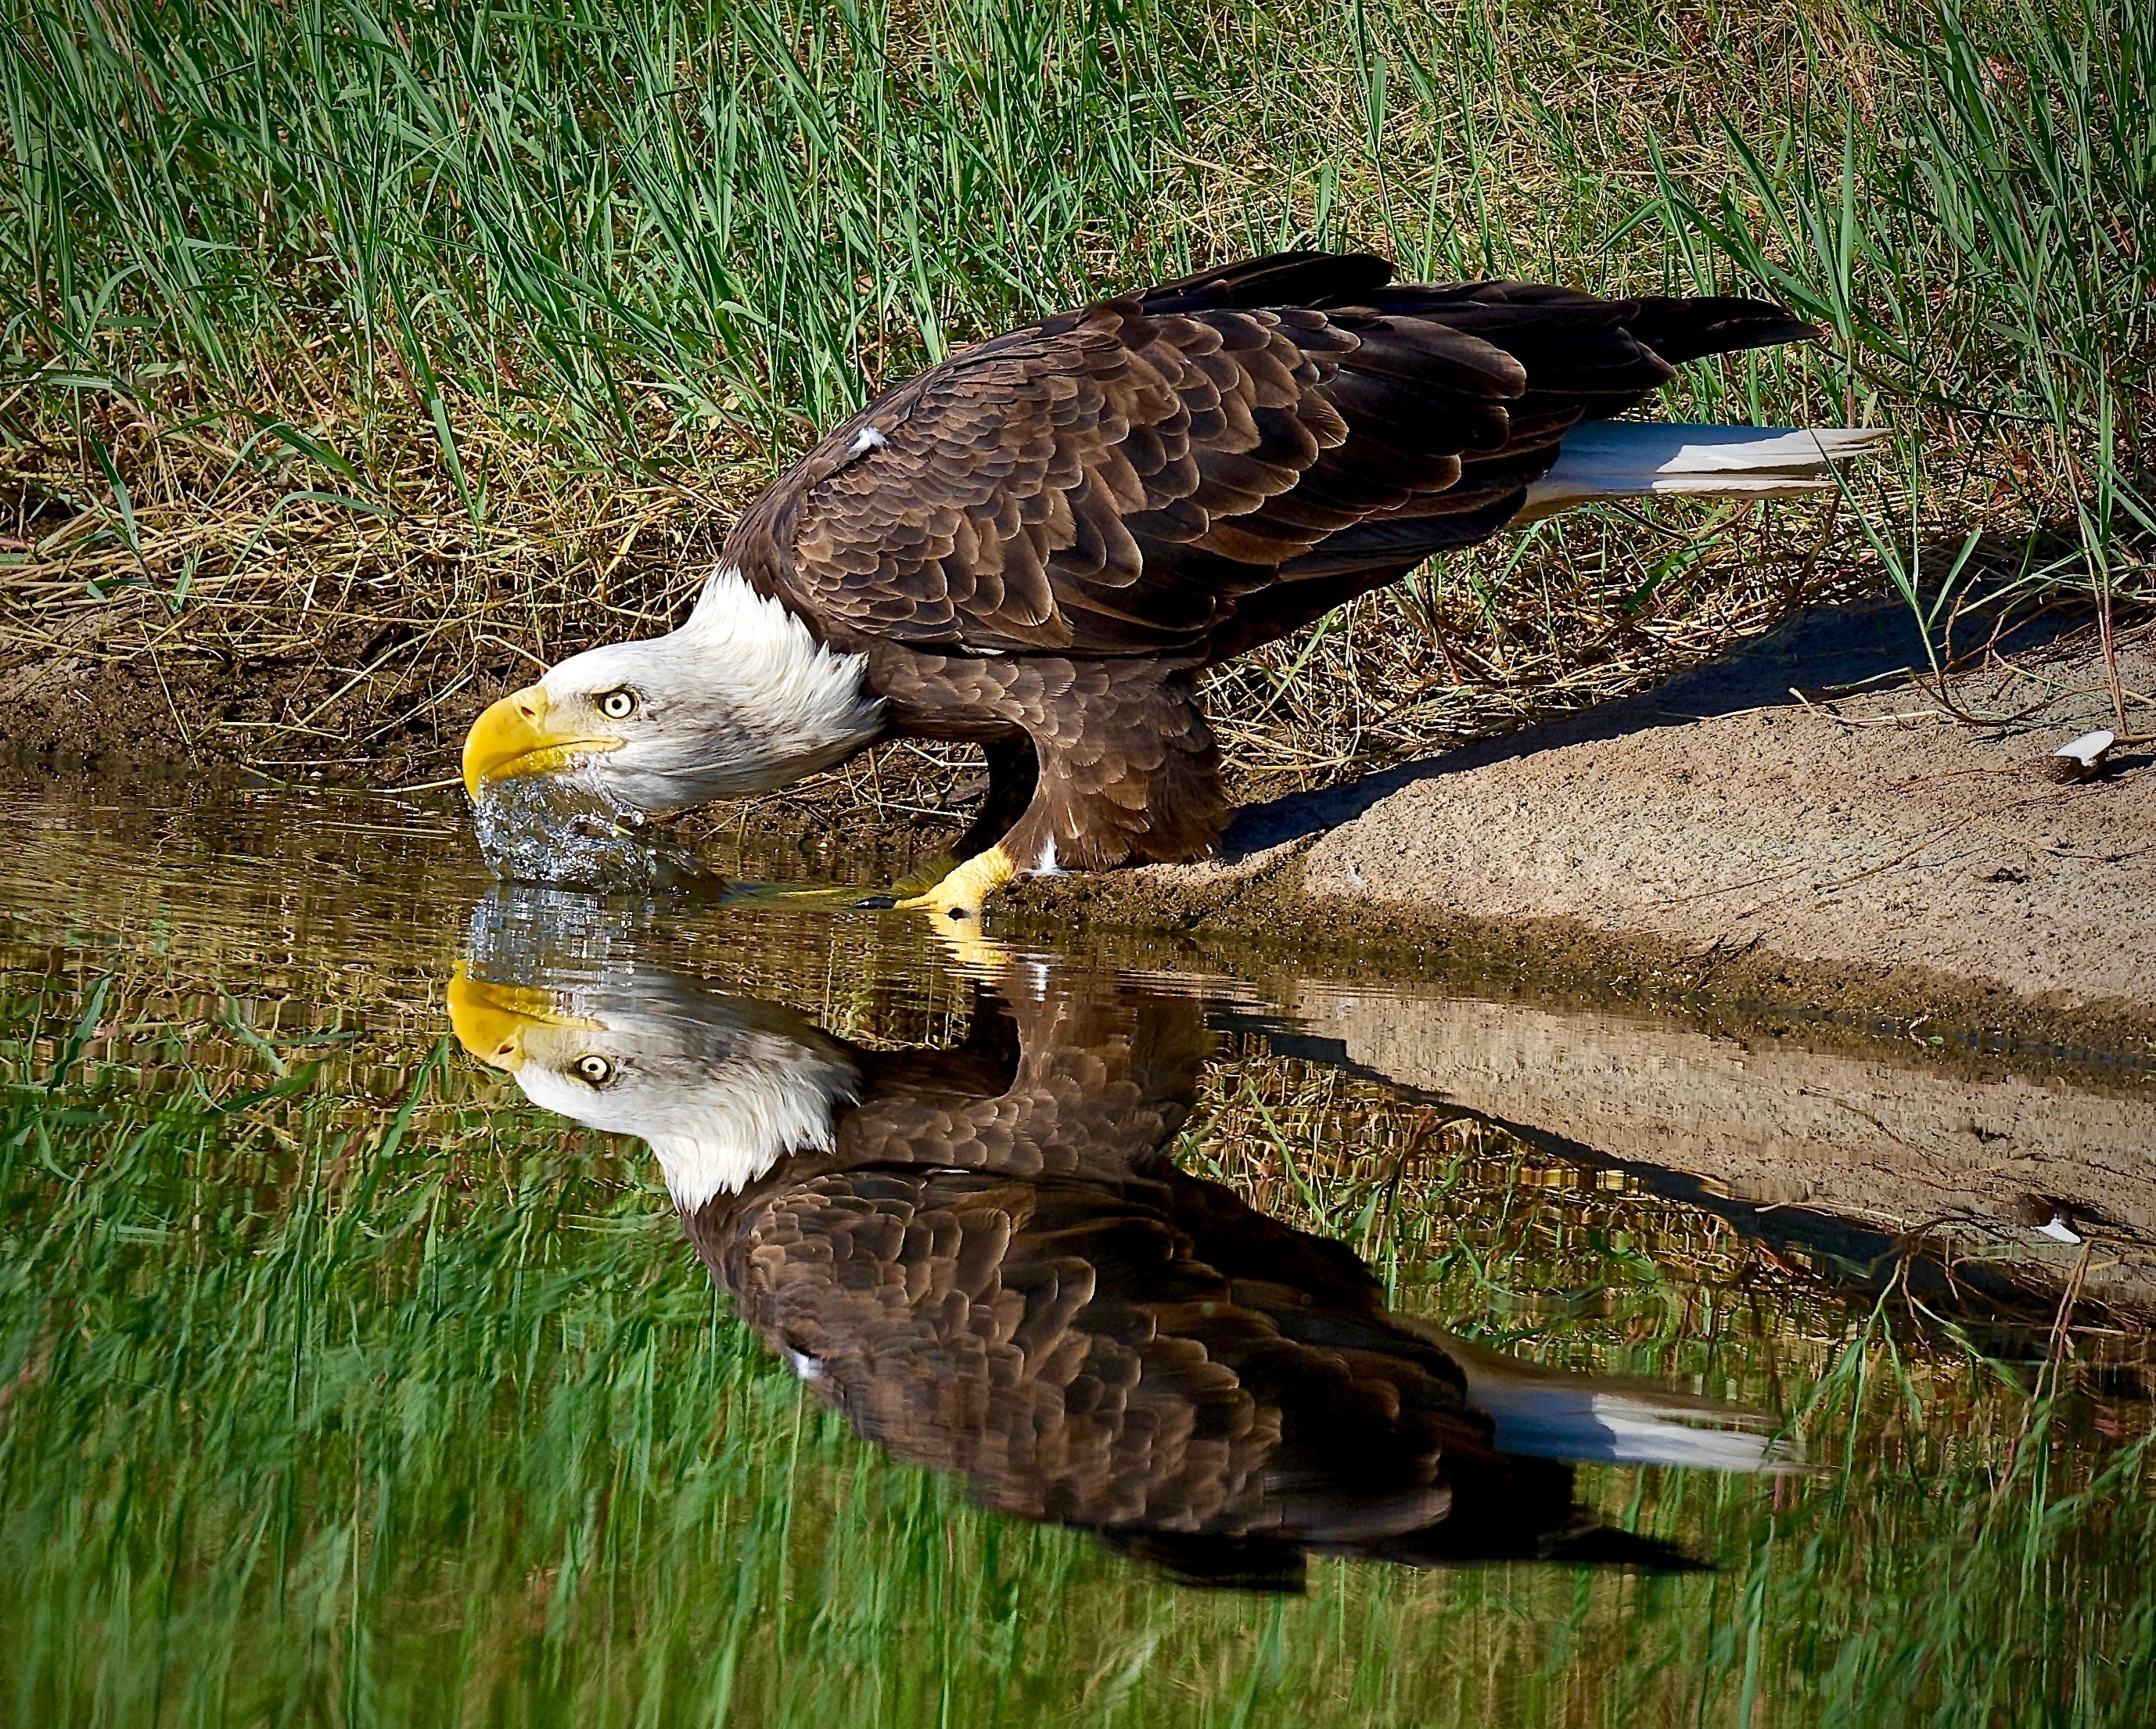 Photo by Mark Koster  |  Scottsdale's male Bald Eagle that the locals call "Bandit" taking a drink from on of the small ponds located right in our condo front yard in the Heart of Scottsdale !